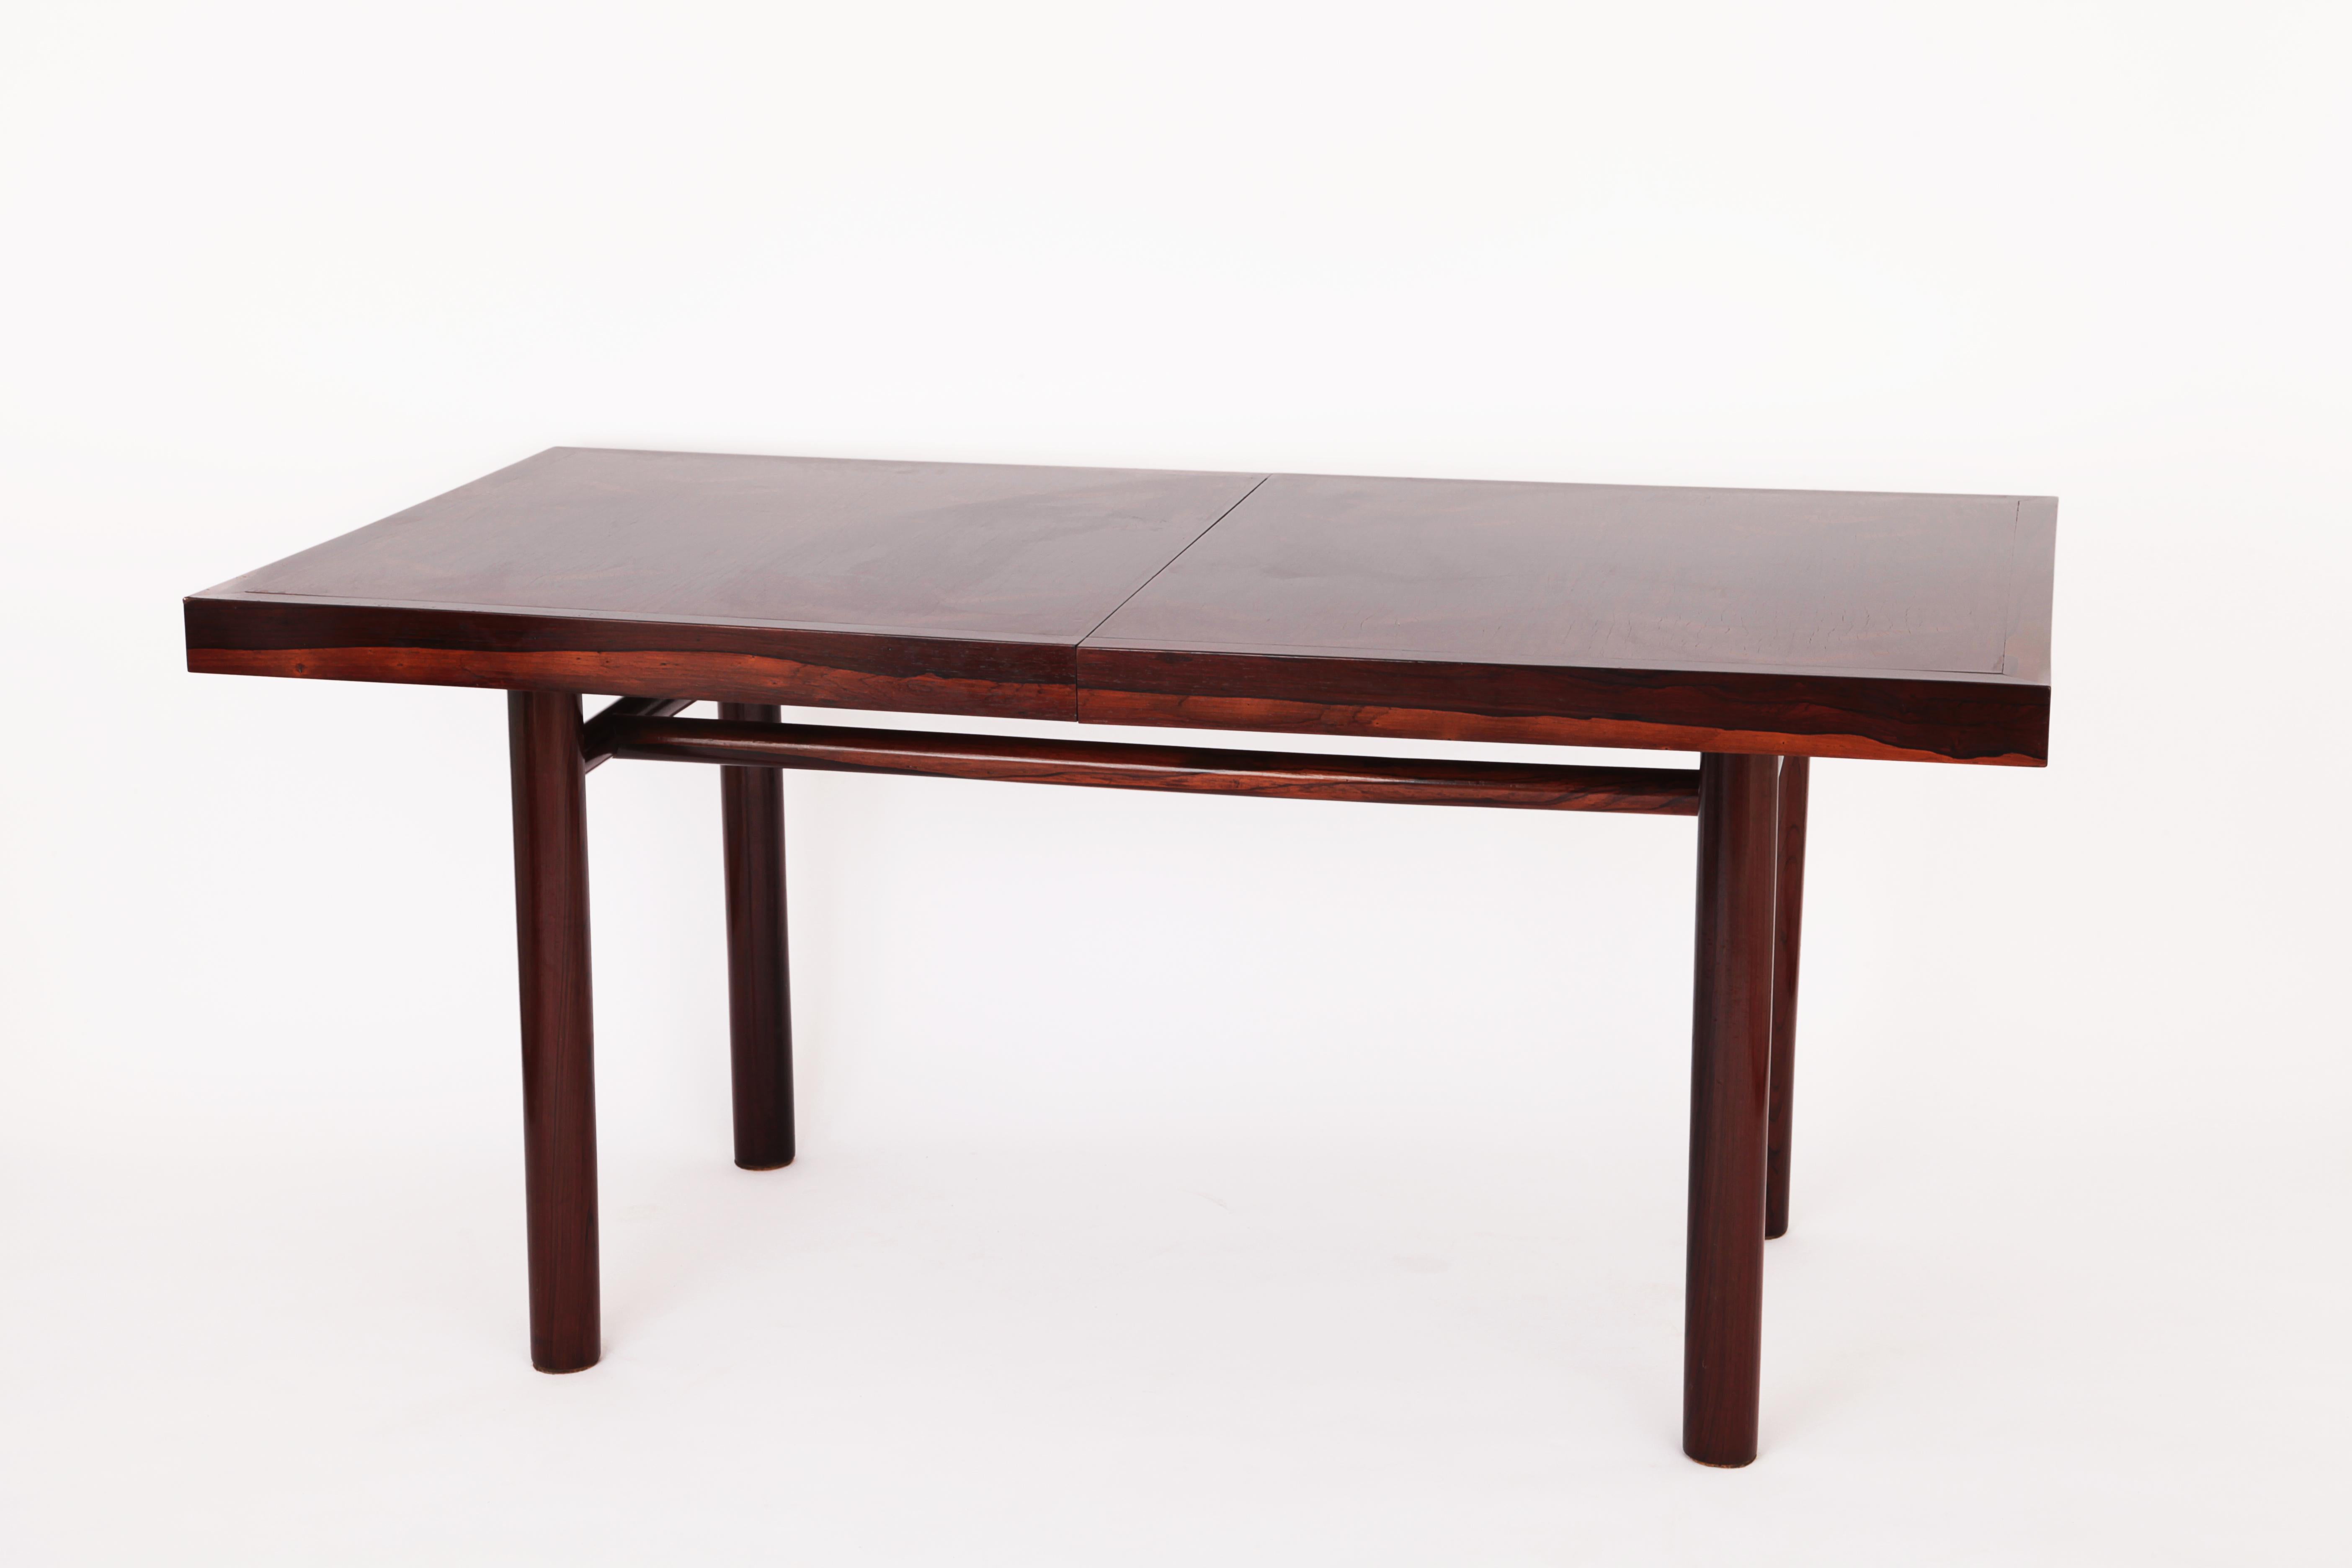 A Dining table by Joaquim Tenreiro made of solid Imbuia with beautiful grain and veins.
A wide solid wood border underlines the modernity of the lines.

The table can be use as a desk du to her size or console. 

There are 2 extensions (2x36